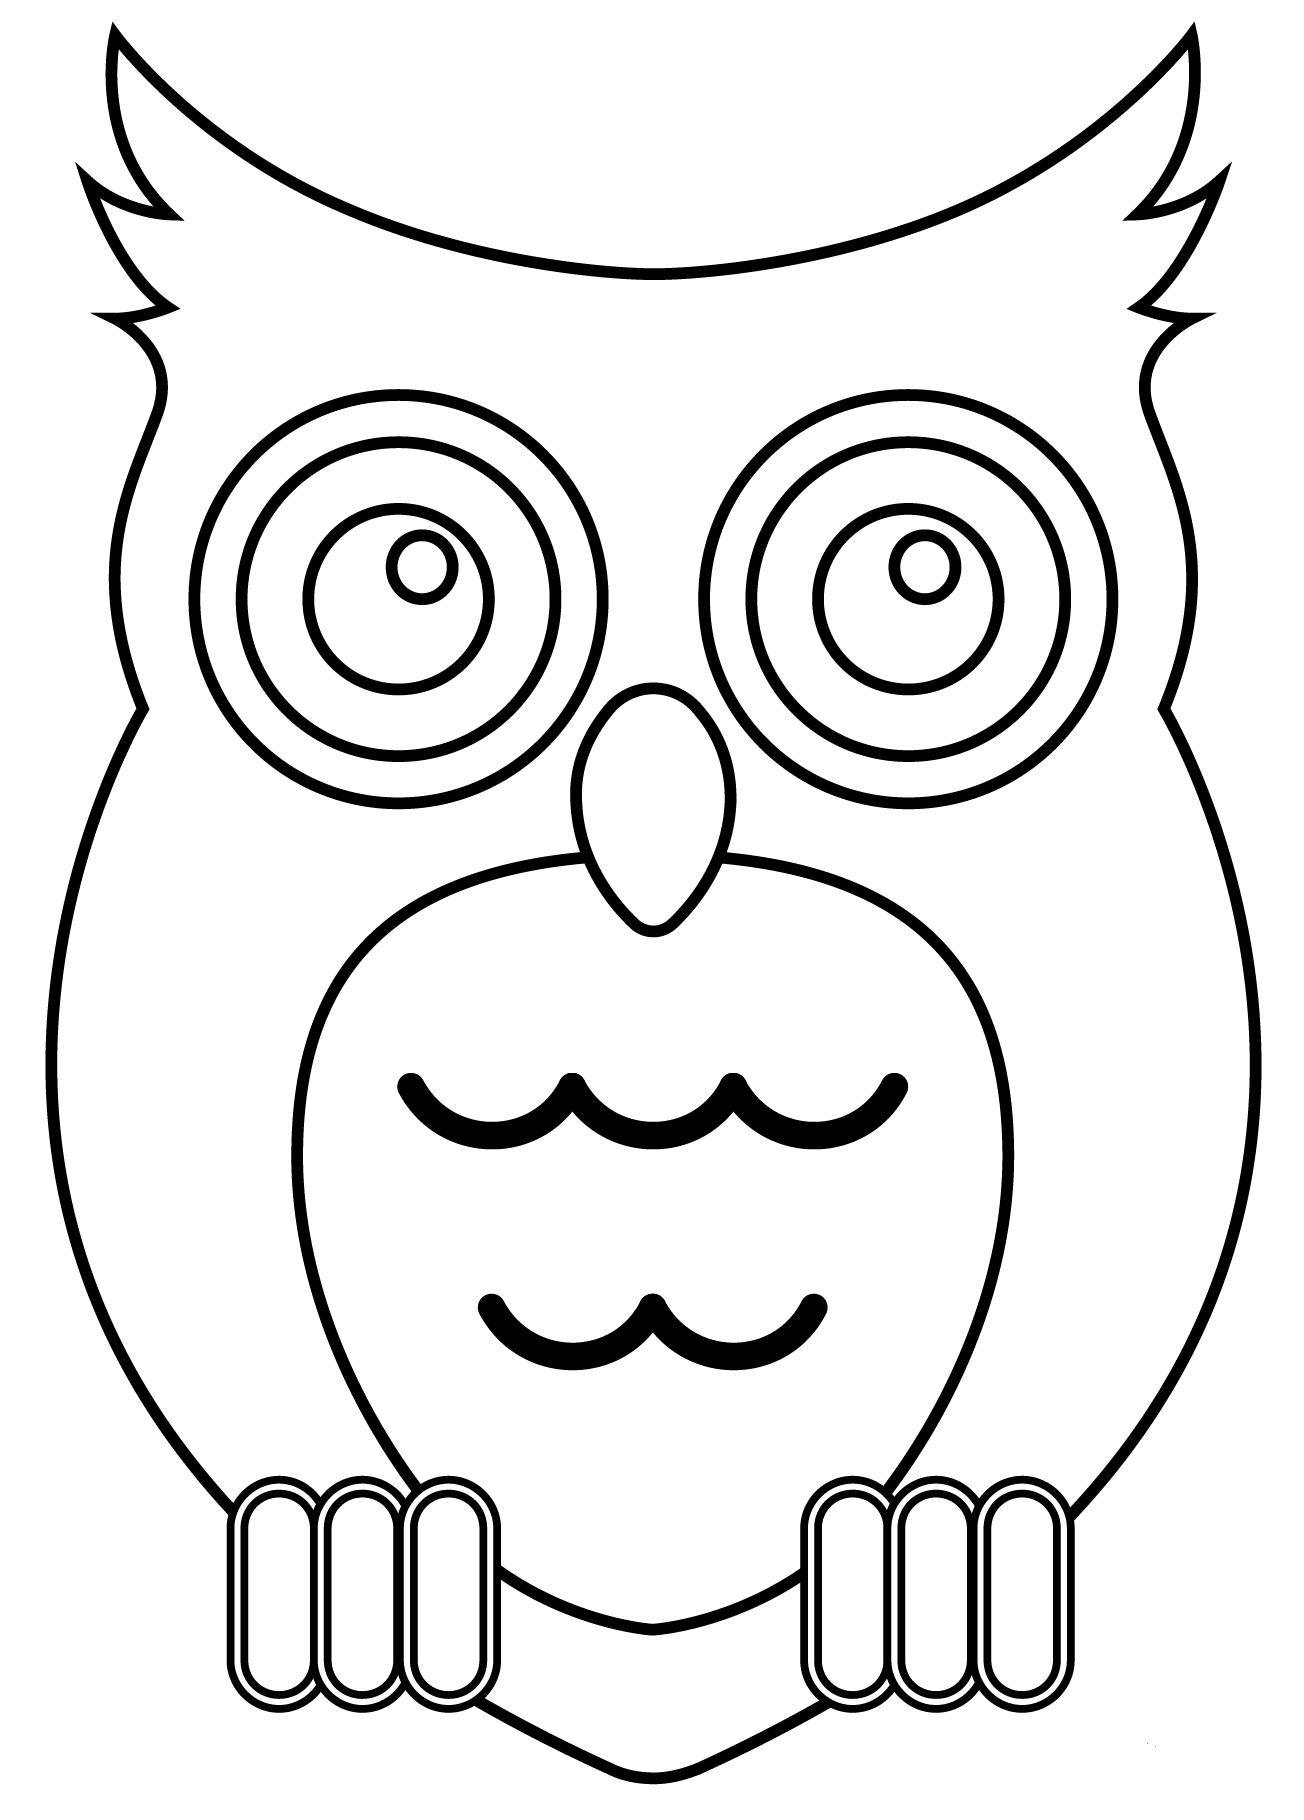 Owl Emoji coloring page - ColouringPages